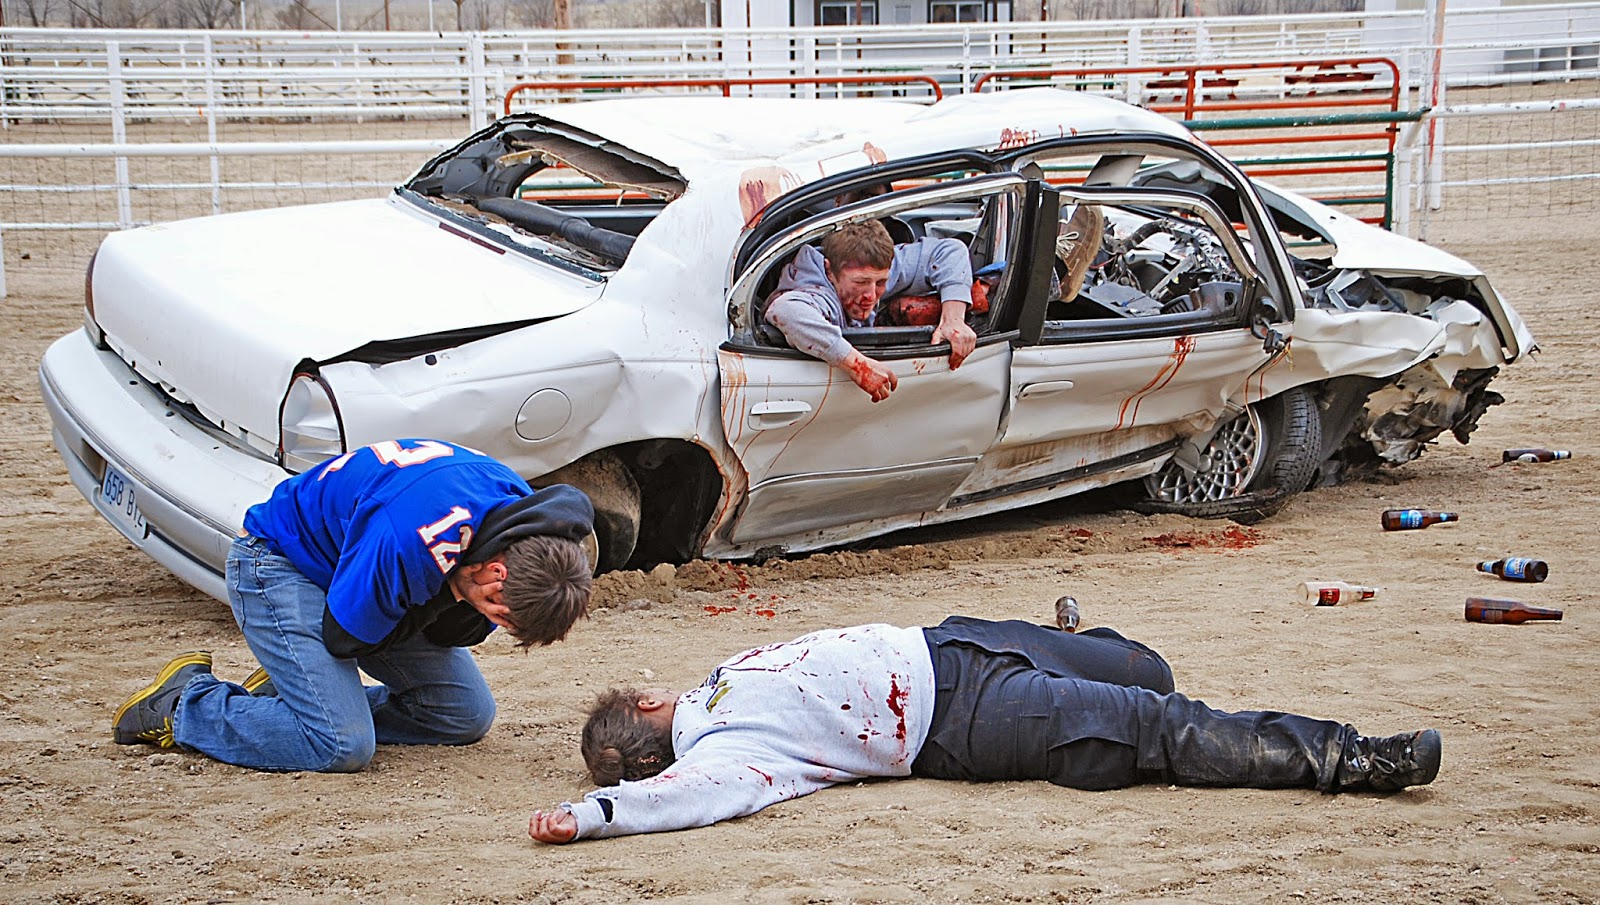 Fatal Car Accident Bodies www.imgkid.com - The Image Kid.